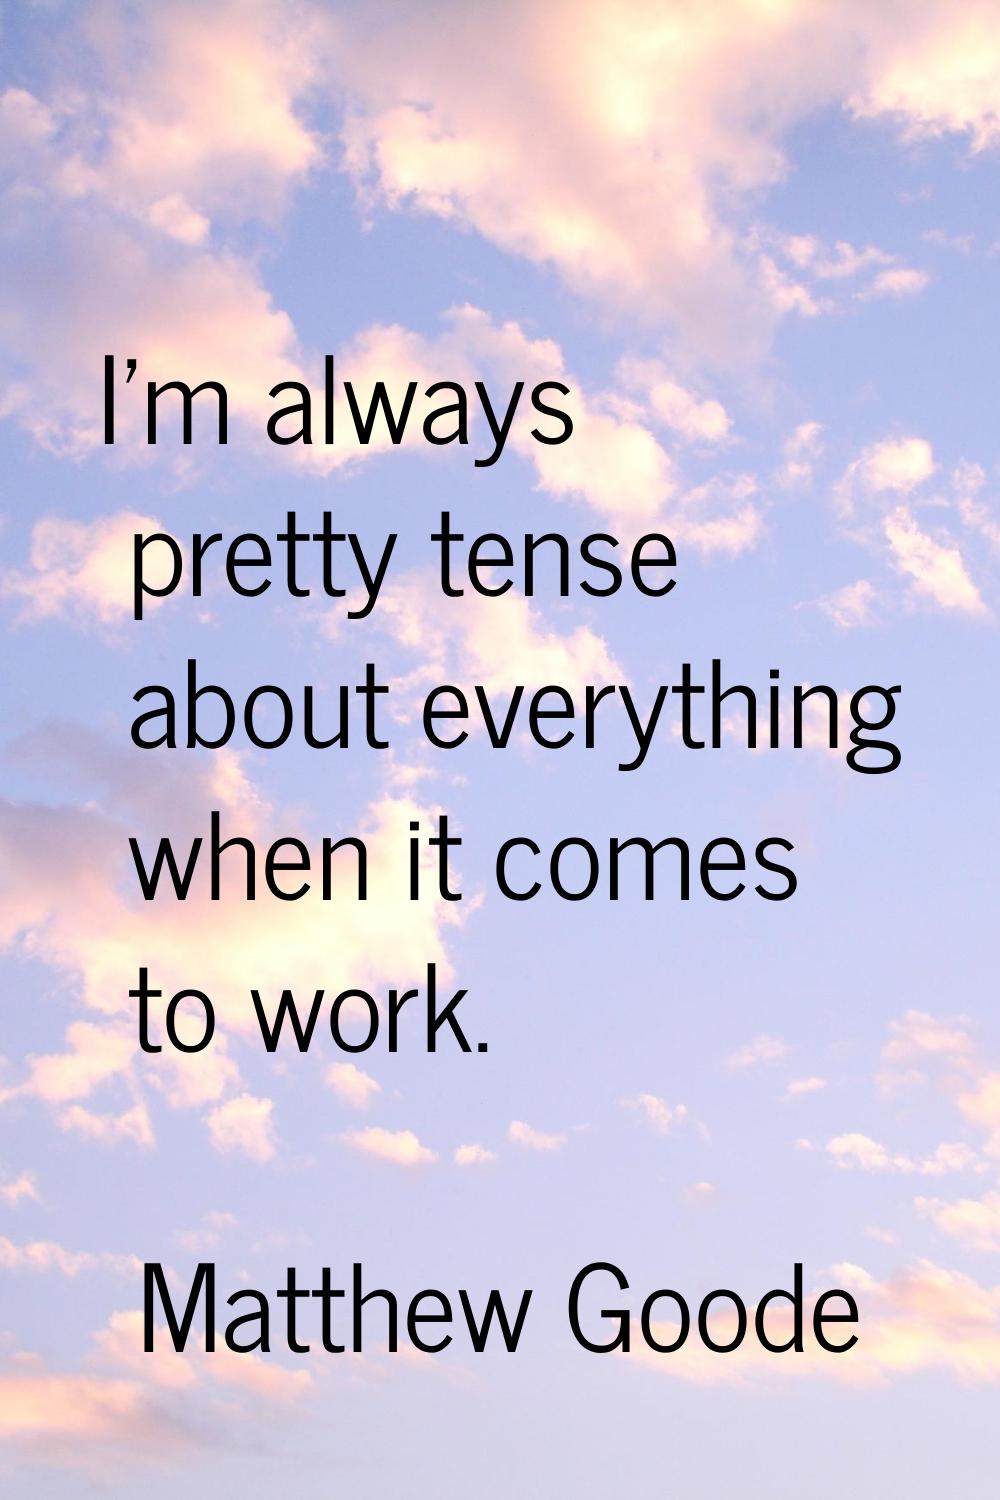 I'm always pretty tense about everything when it comes to work.